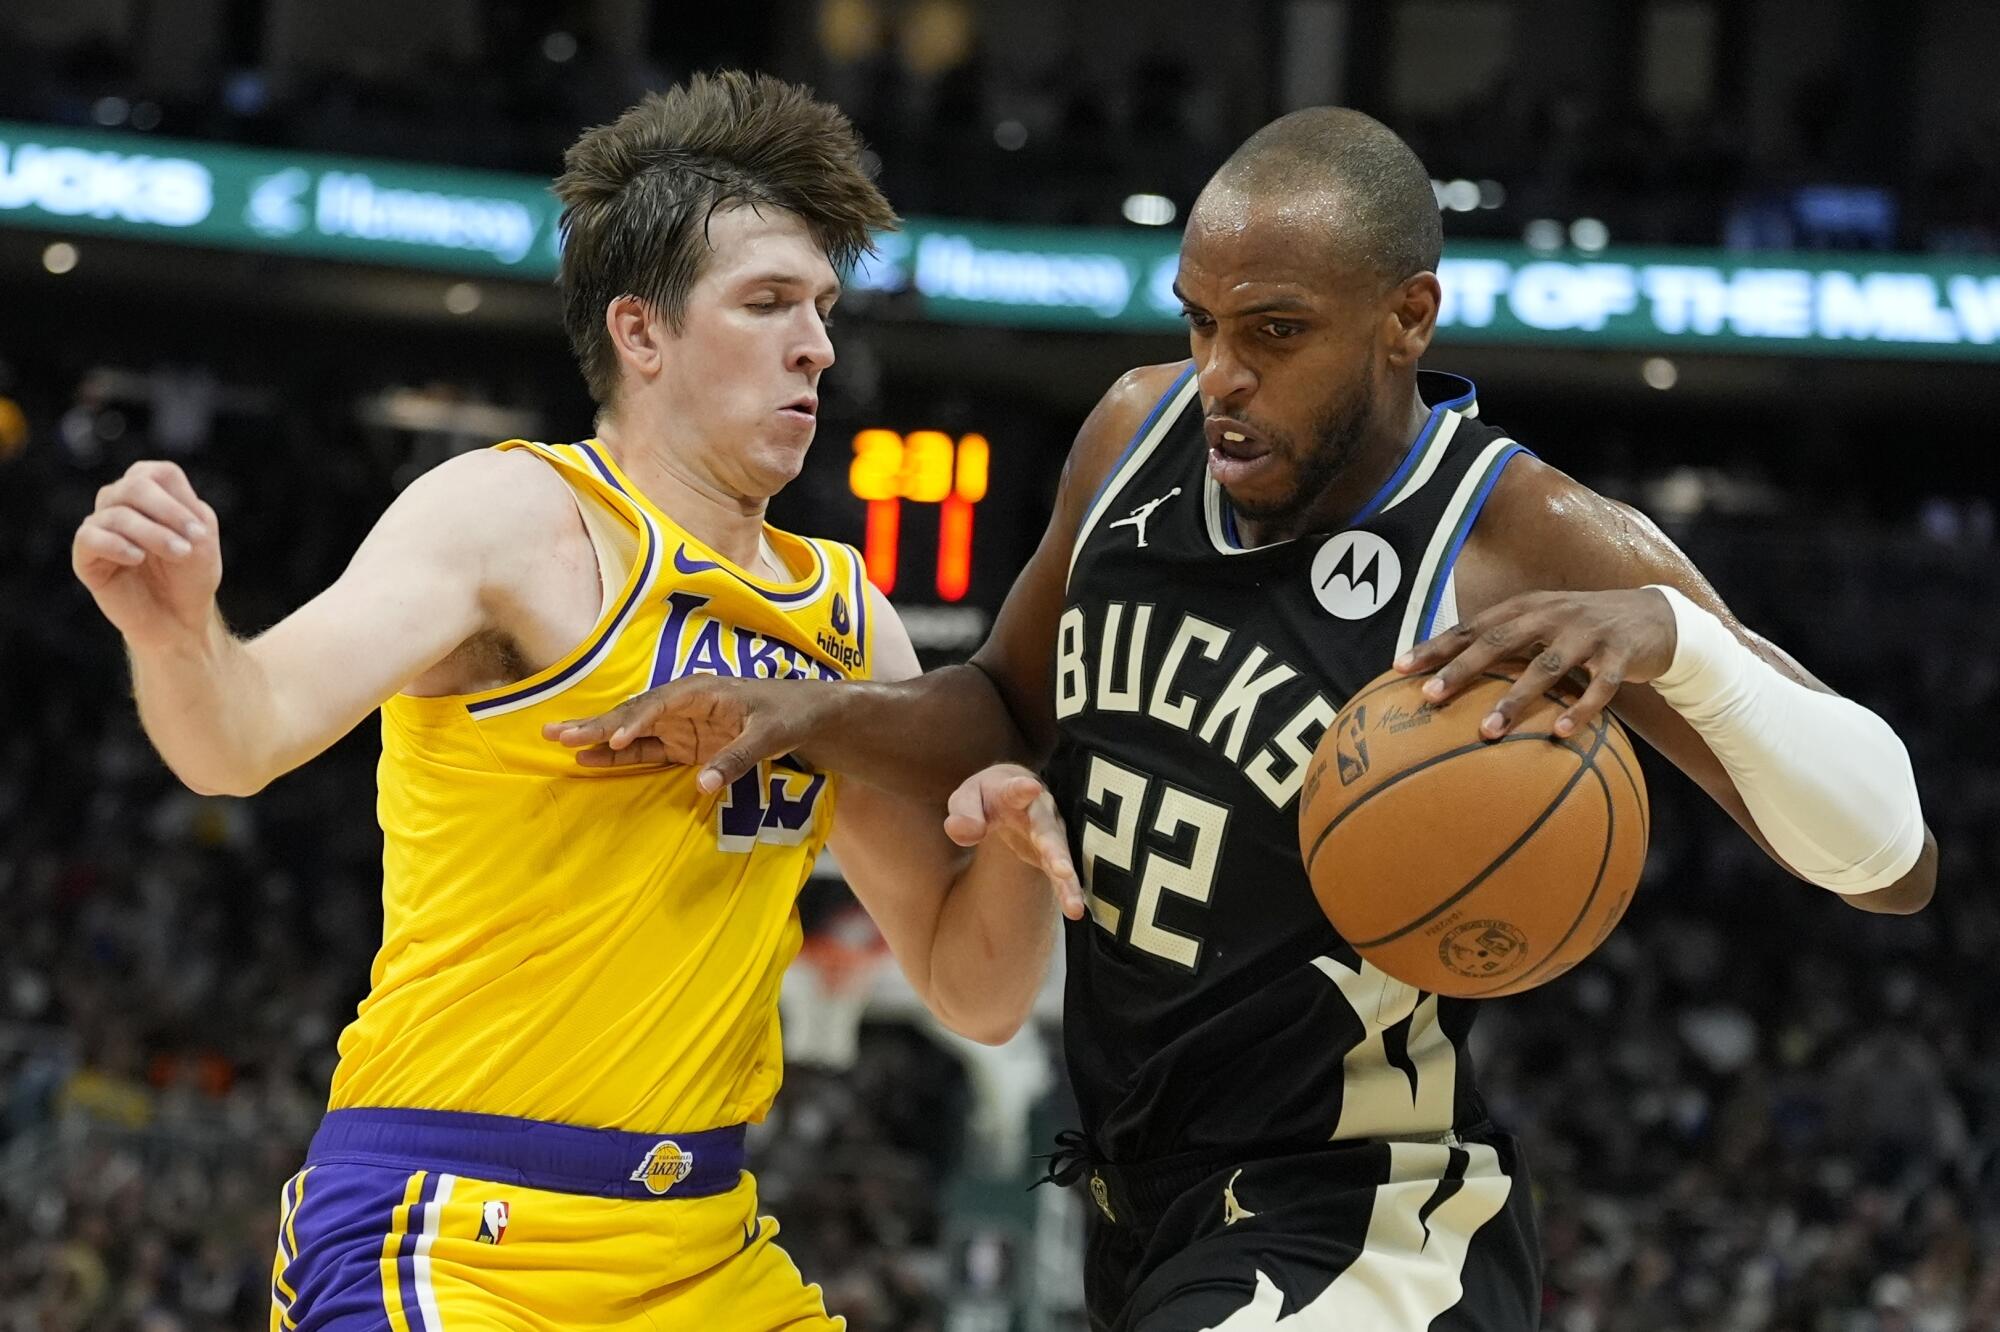 The Bucks' Khris Middleton tries to get past the Lakers' Austin Reaves Tuesday in Milwaukee. 